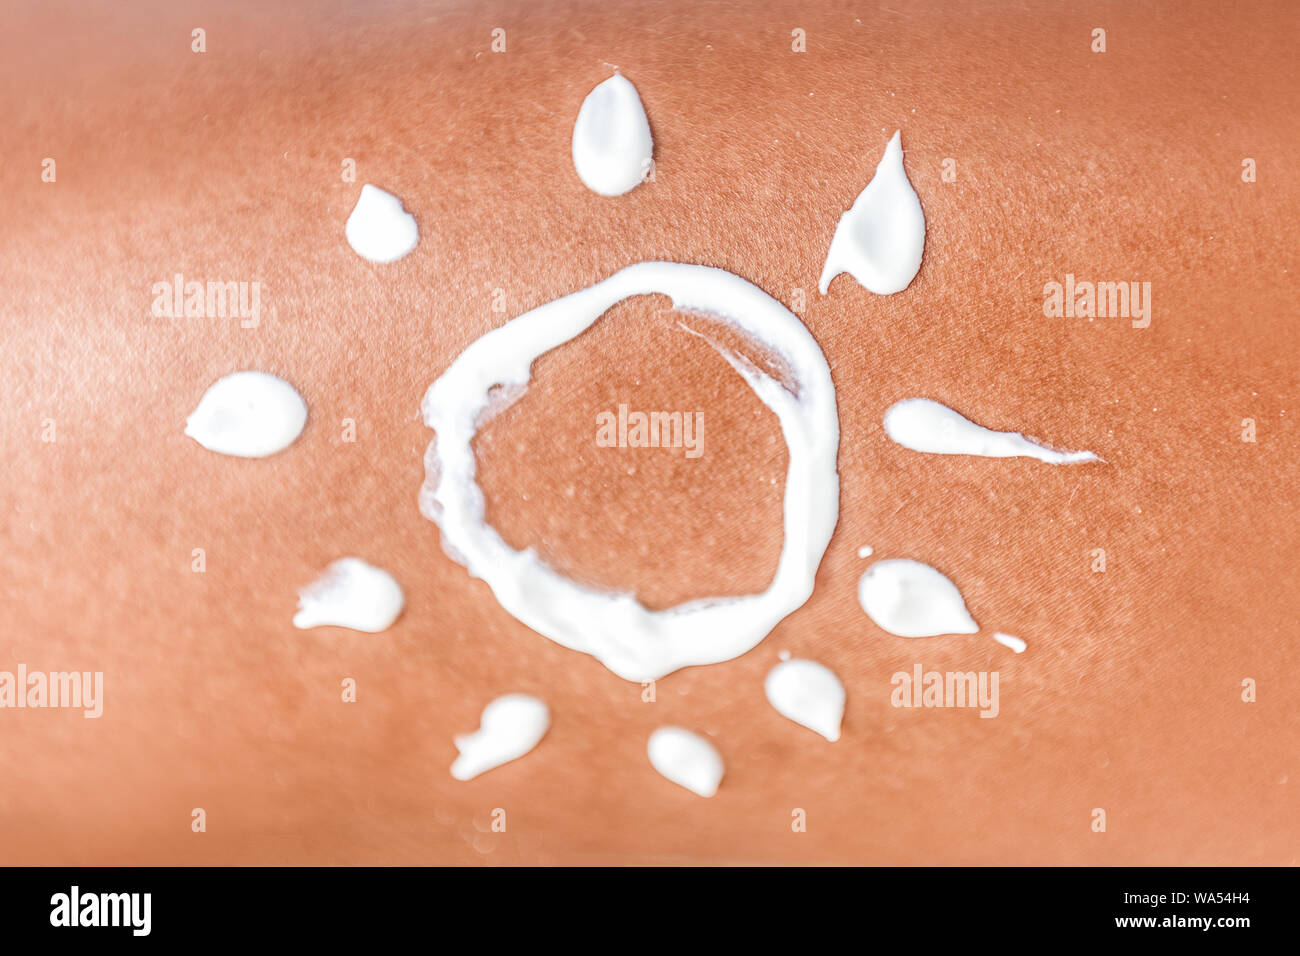 Sunscreen suntan lotion sun drawing in sunblock cream on tanned skin closeup. Female body crop of illustration painted on body Concept for skin cancer or sunburn uv rays protection. Stock Photo